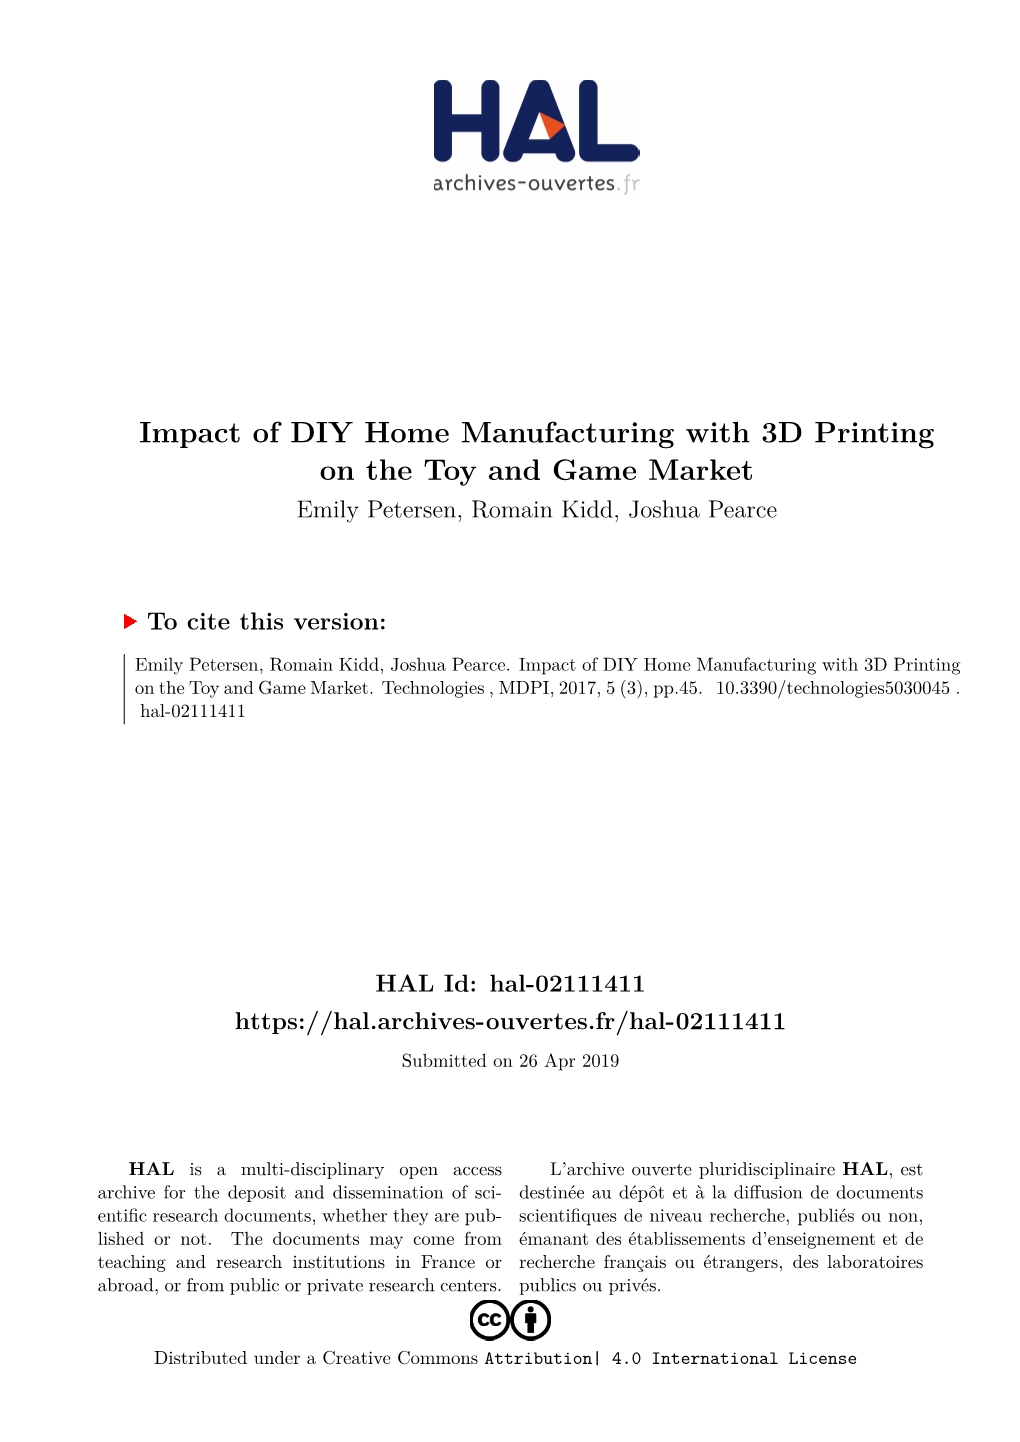 Impact of DIY Home Manufacturing with 3D Printing on the Toy and Game Market Emily Petersen, Romain Kidd, Joshua Pearce